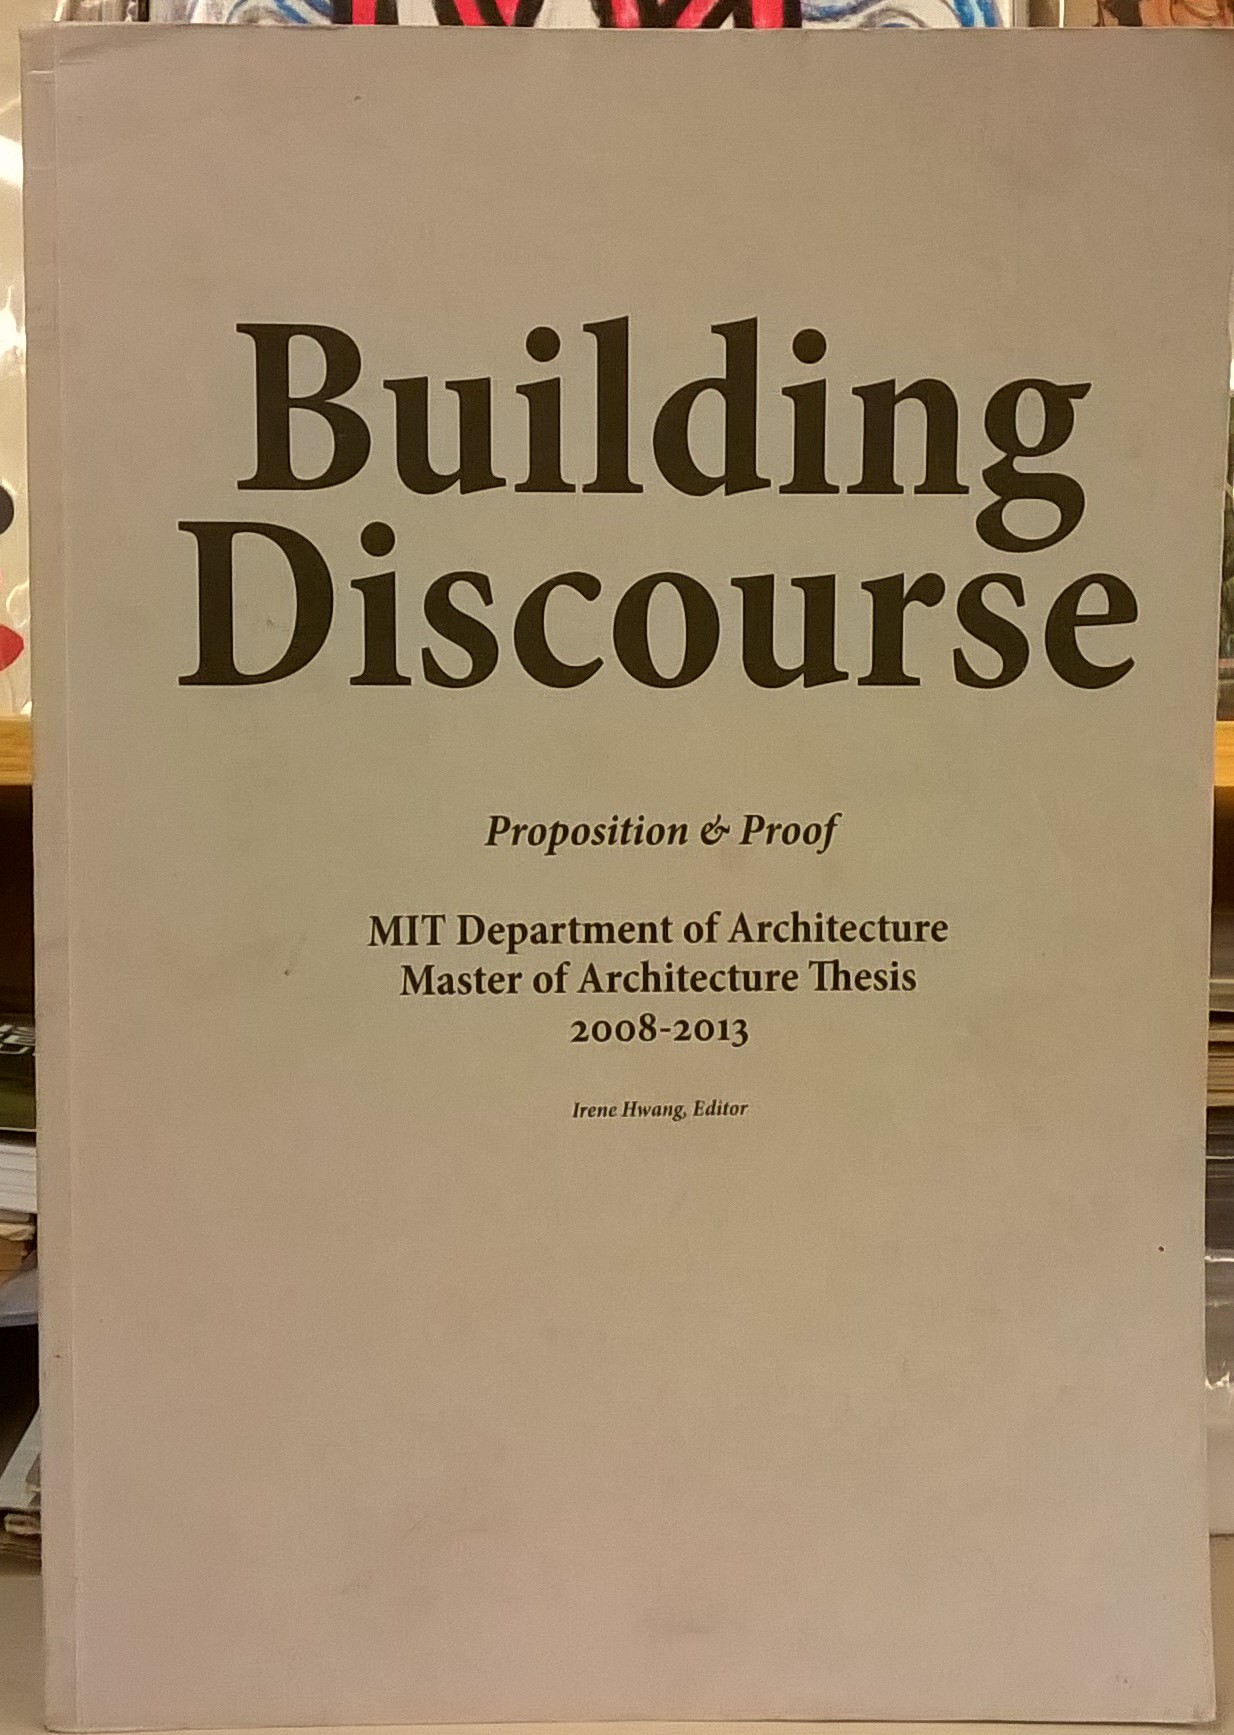 Mit master of architecture thesis